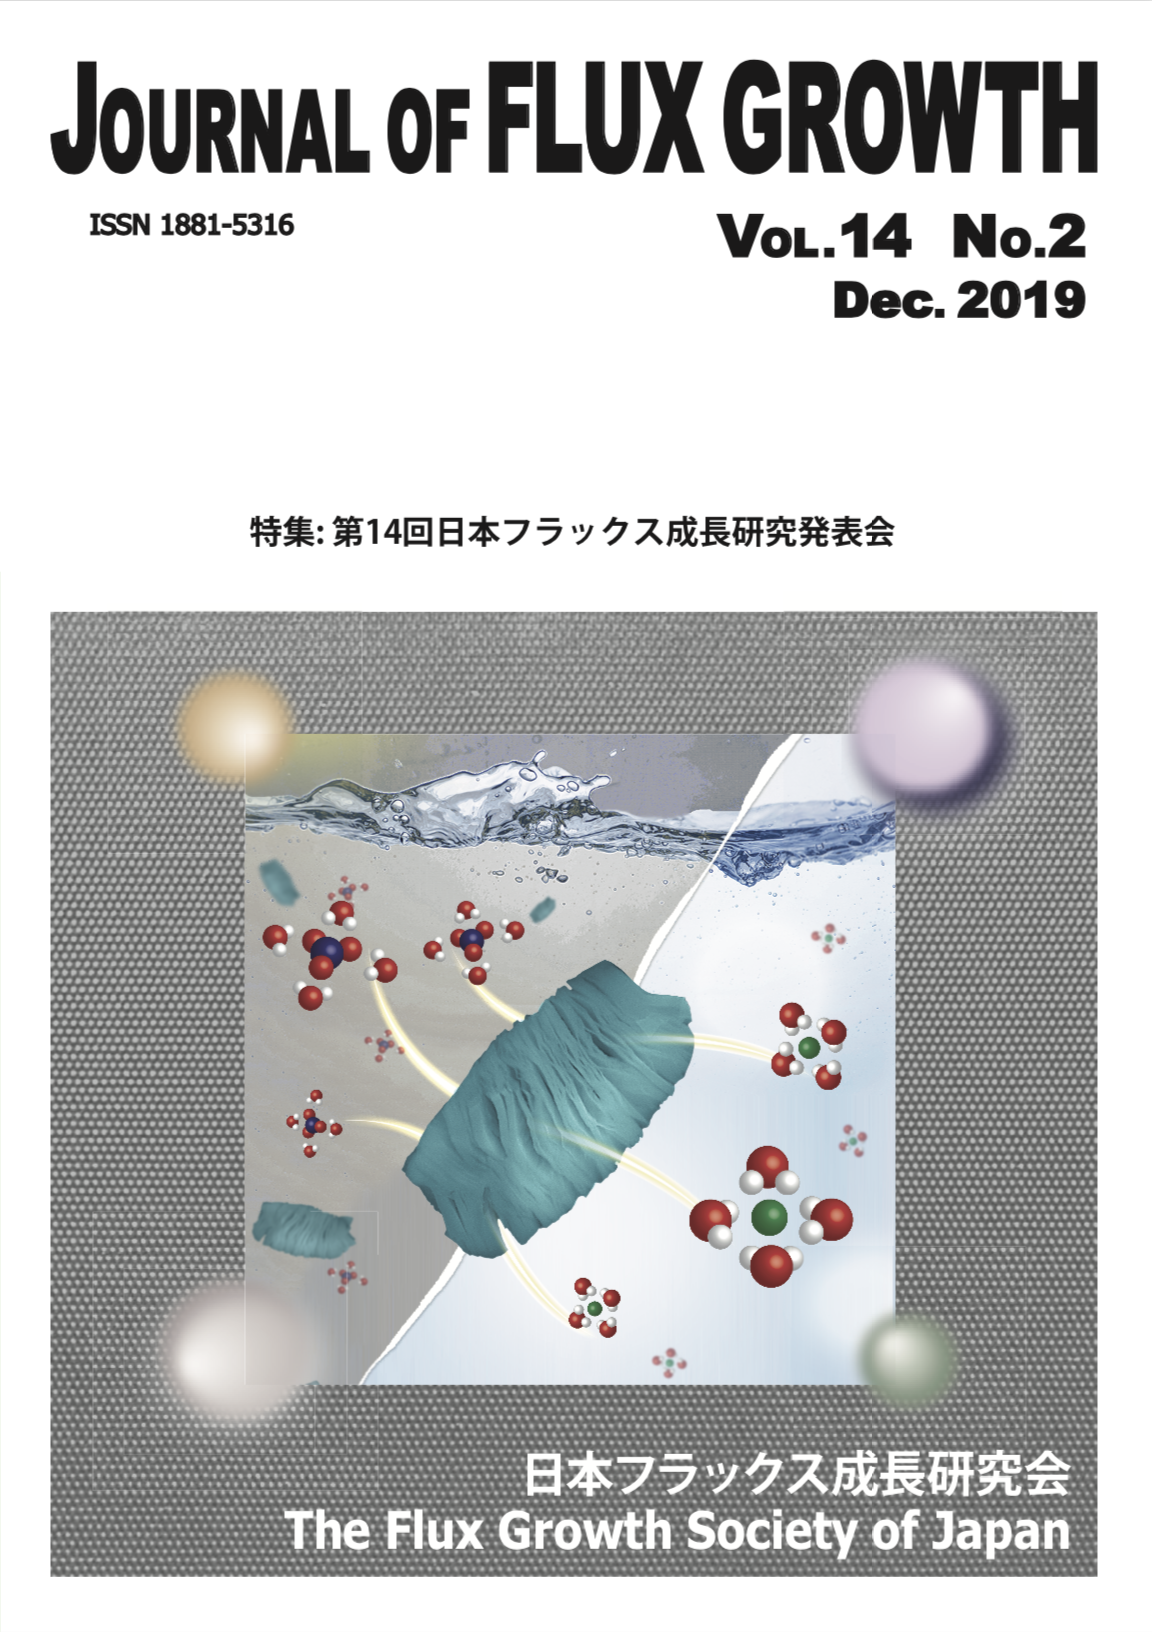 JOURNAL OF FLUX GROWTH Vol.14 No.2